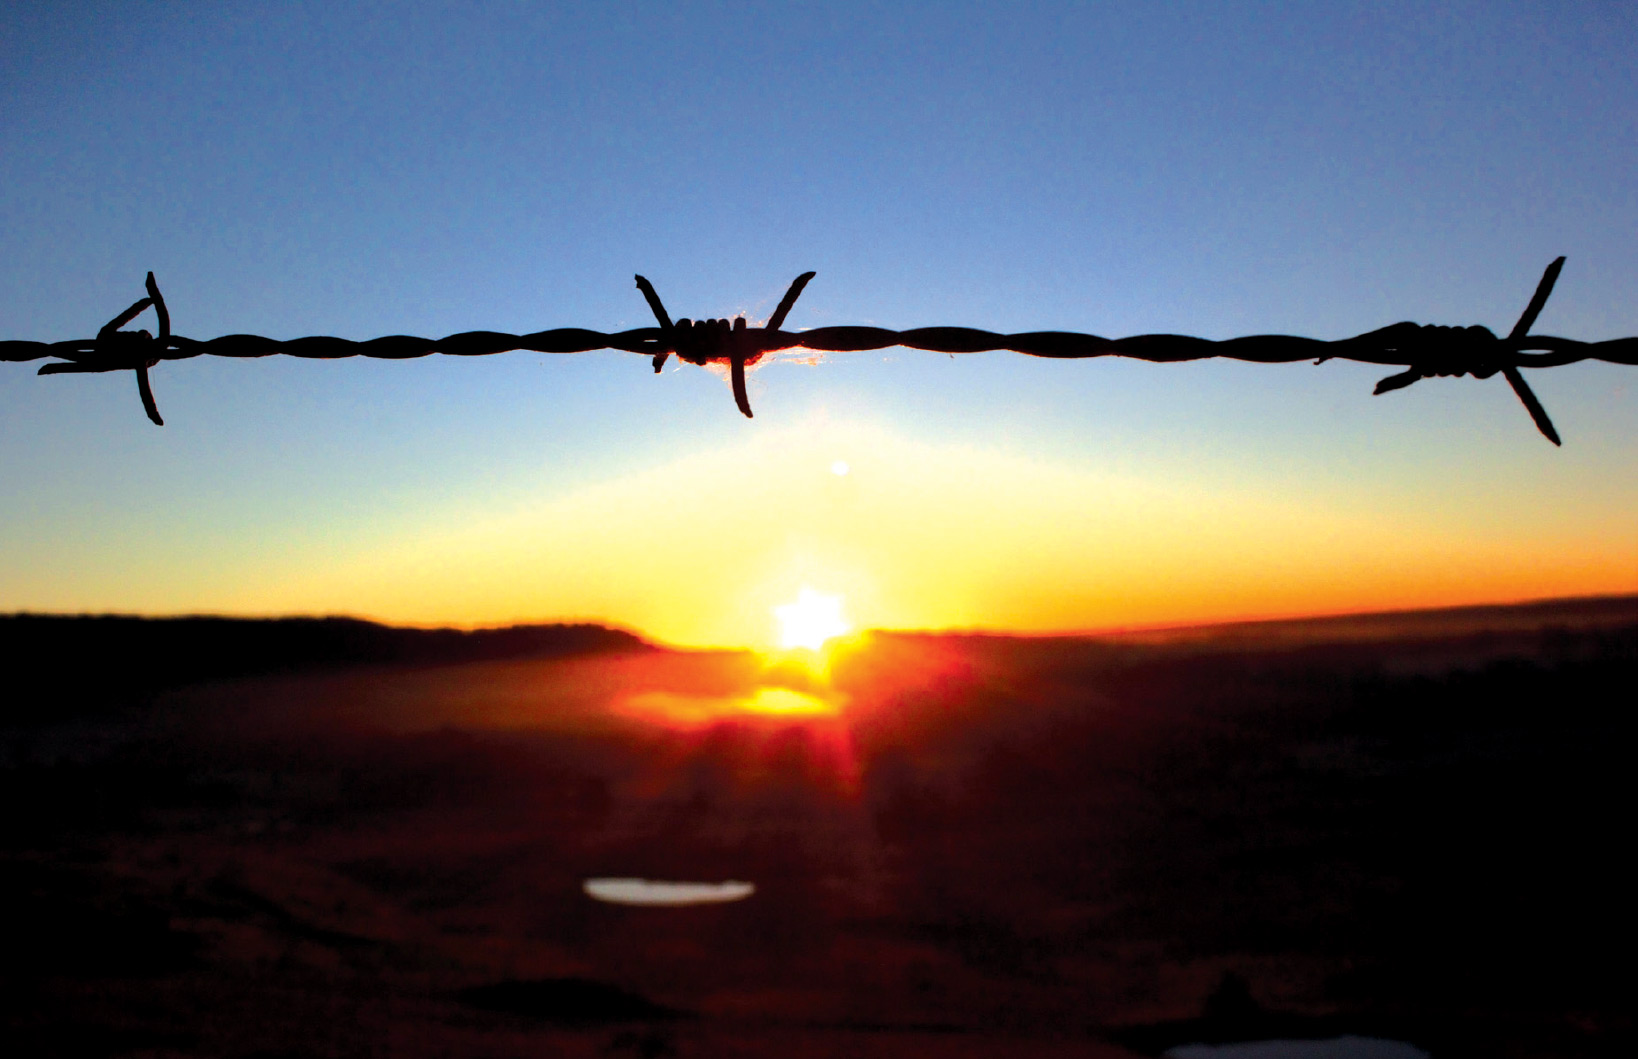 Sunset through barbed wire